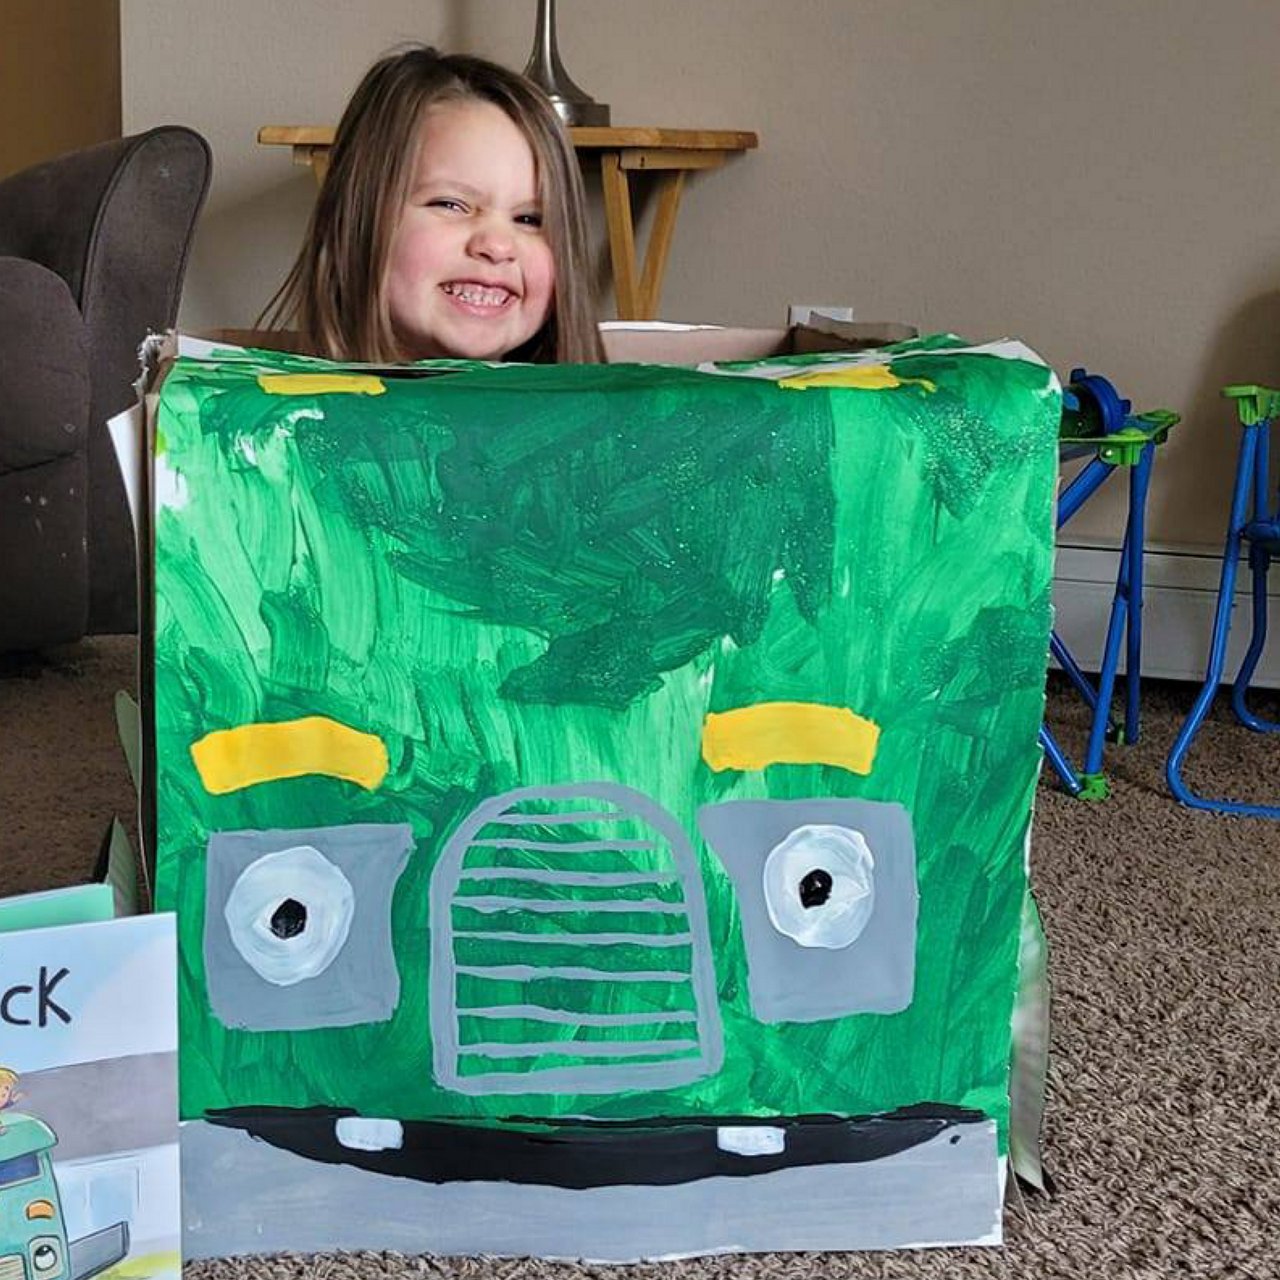 Young girl smiling inside a truck made out of cardboard